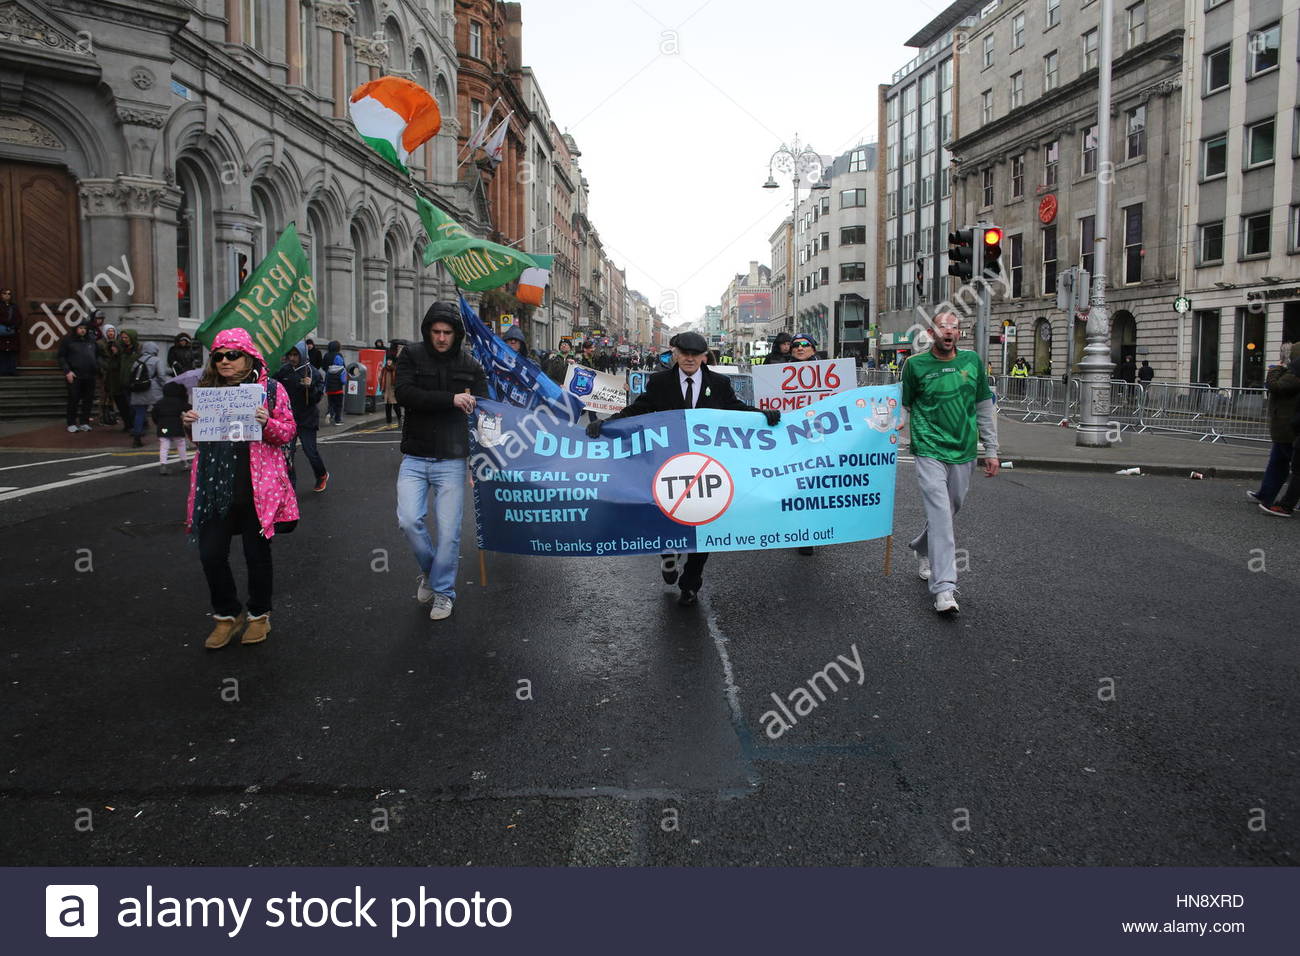 A protest march against corruption, austerity and the banks in Dublin, ireland Stock Photo